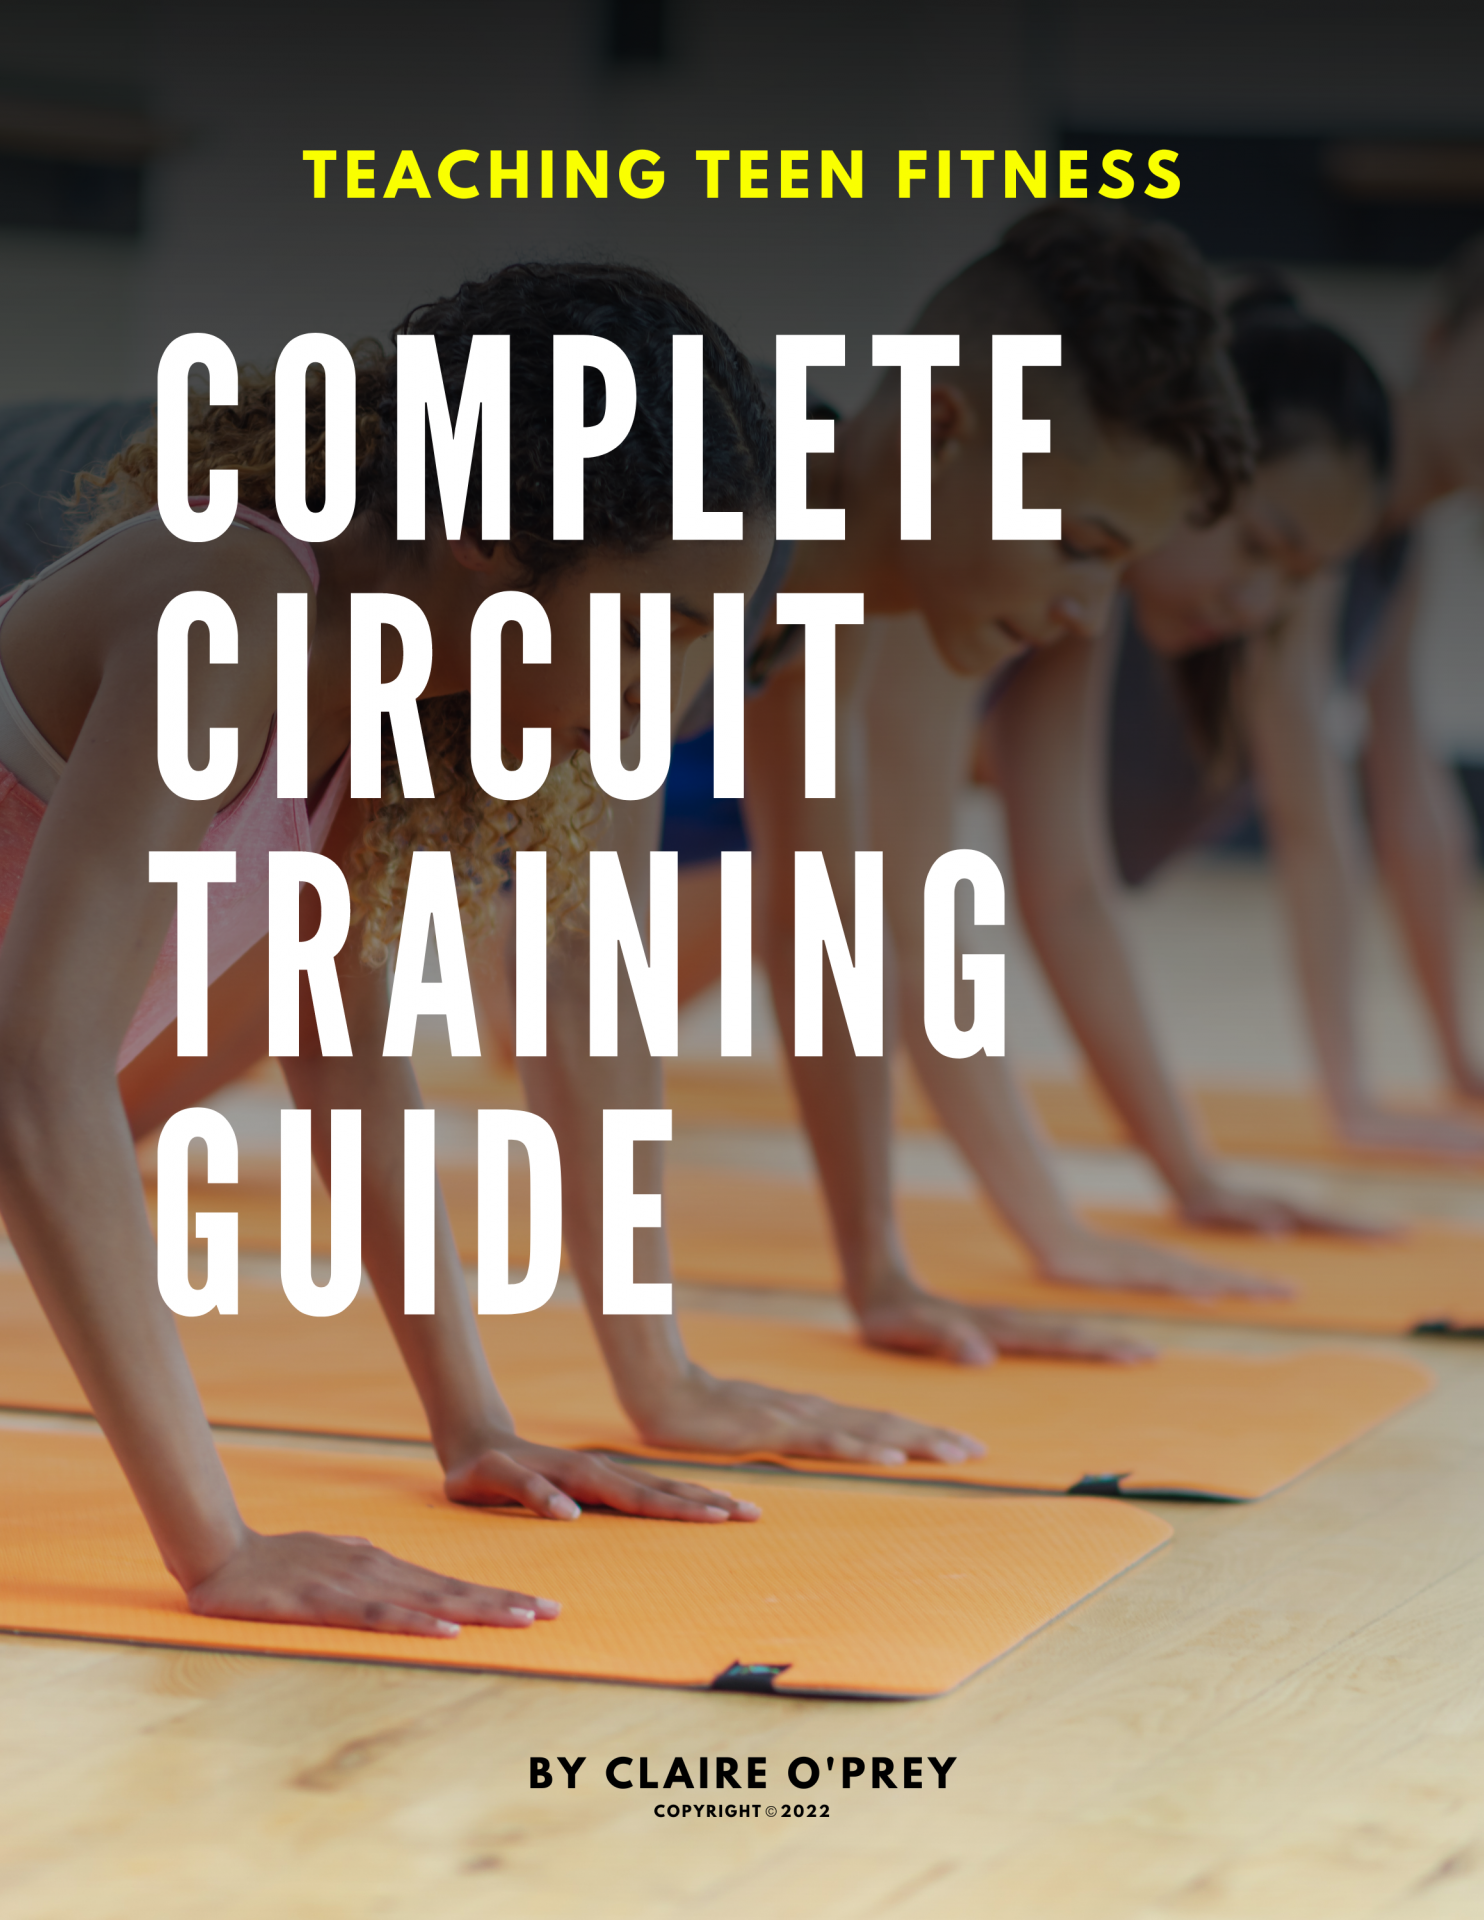 Complete circuit training guide book cover (8.5 × 11in)